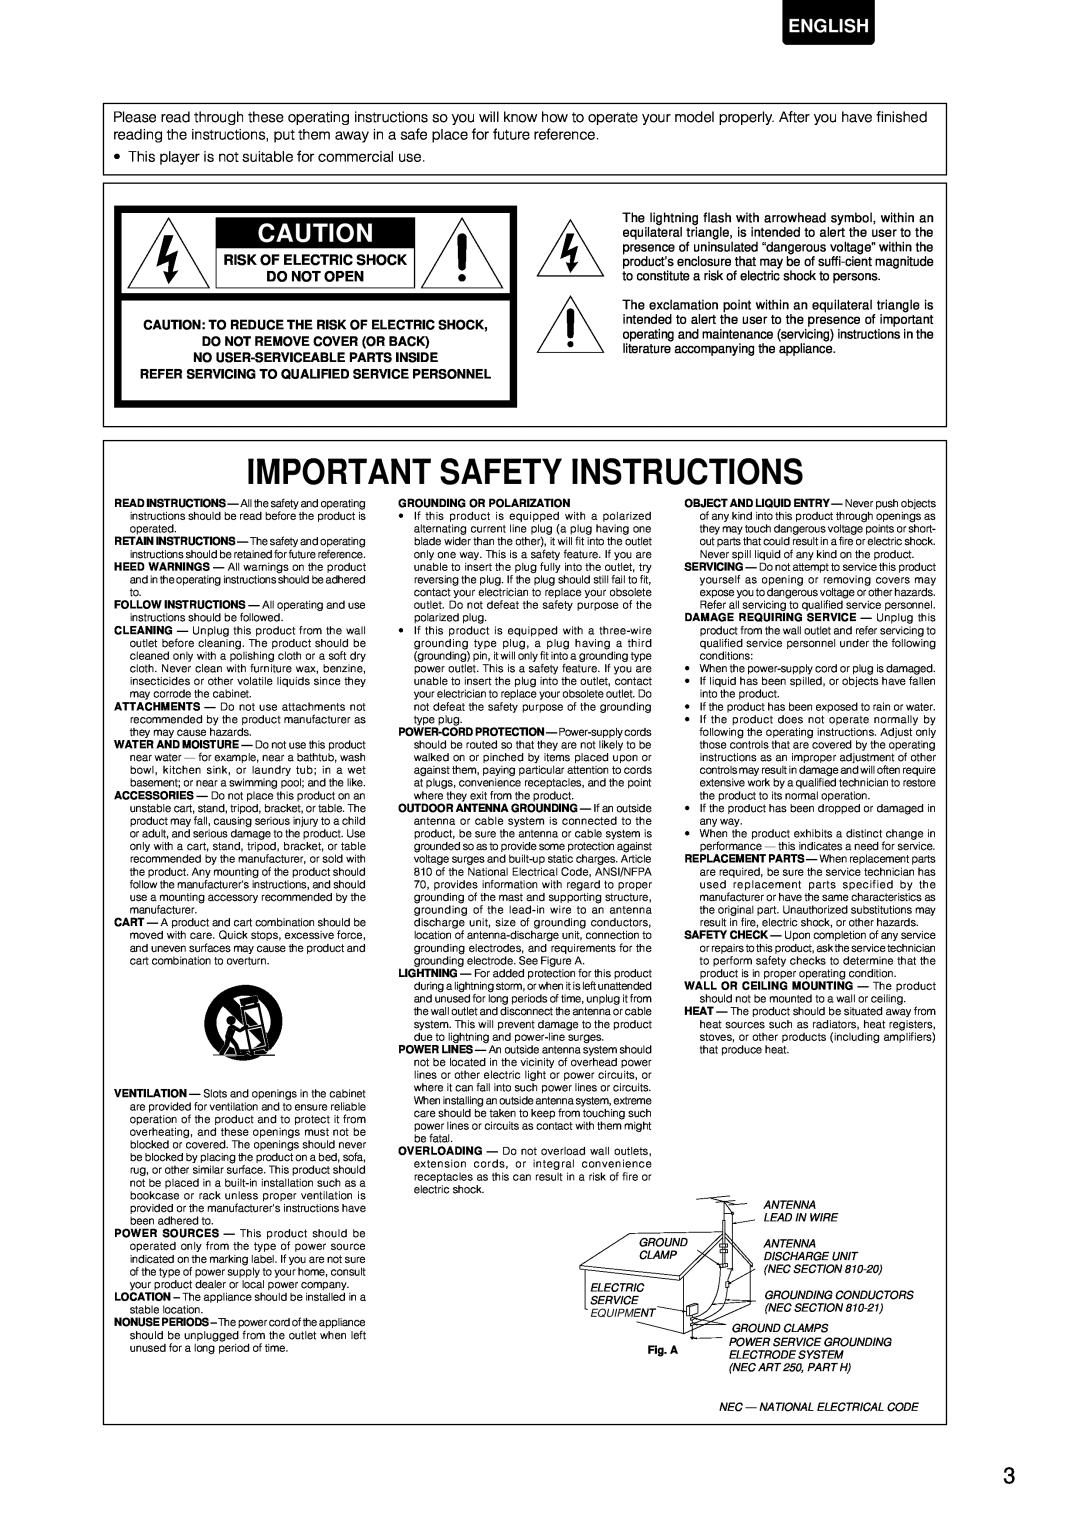 Marantz DV-12S1 manual Important Safety Instructions, English, Risk Of Electric Shock, Do Not Open, Fig. A 